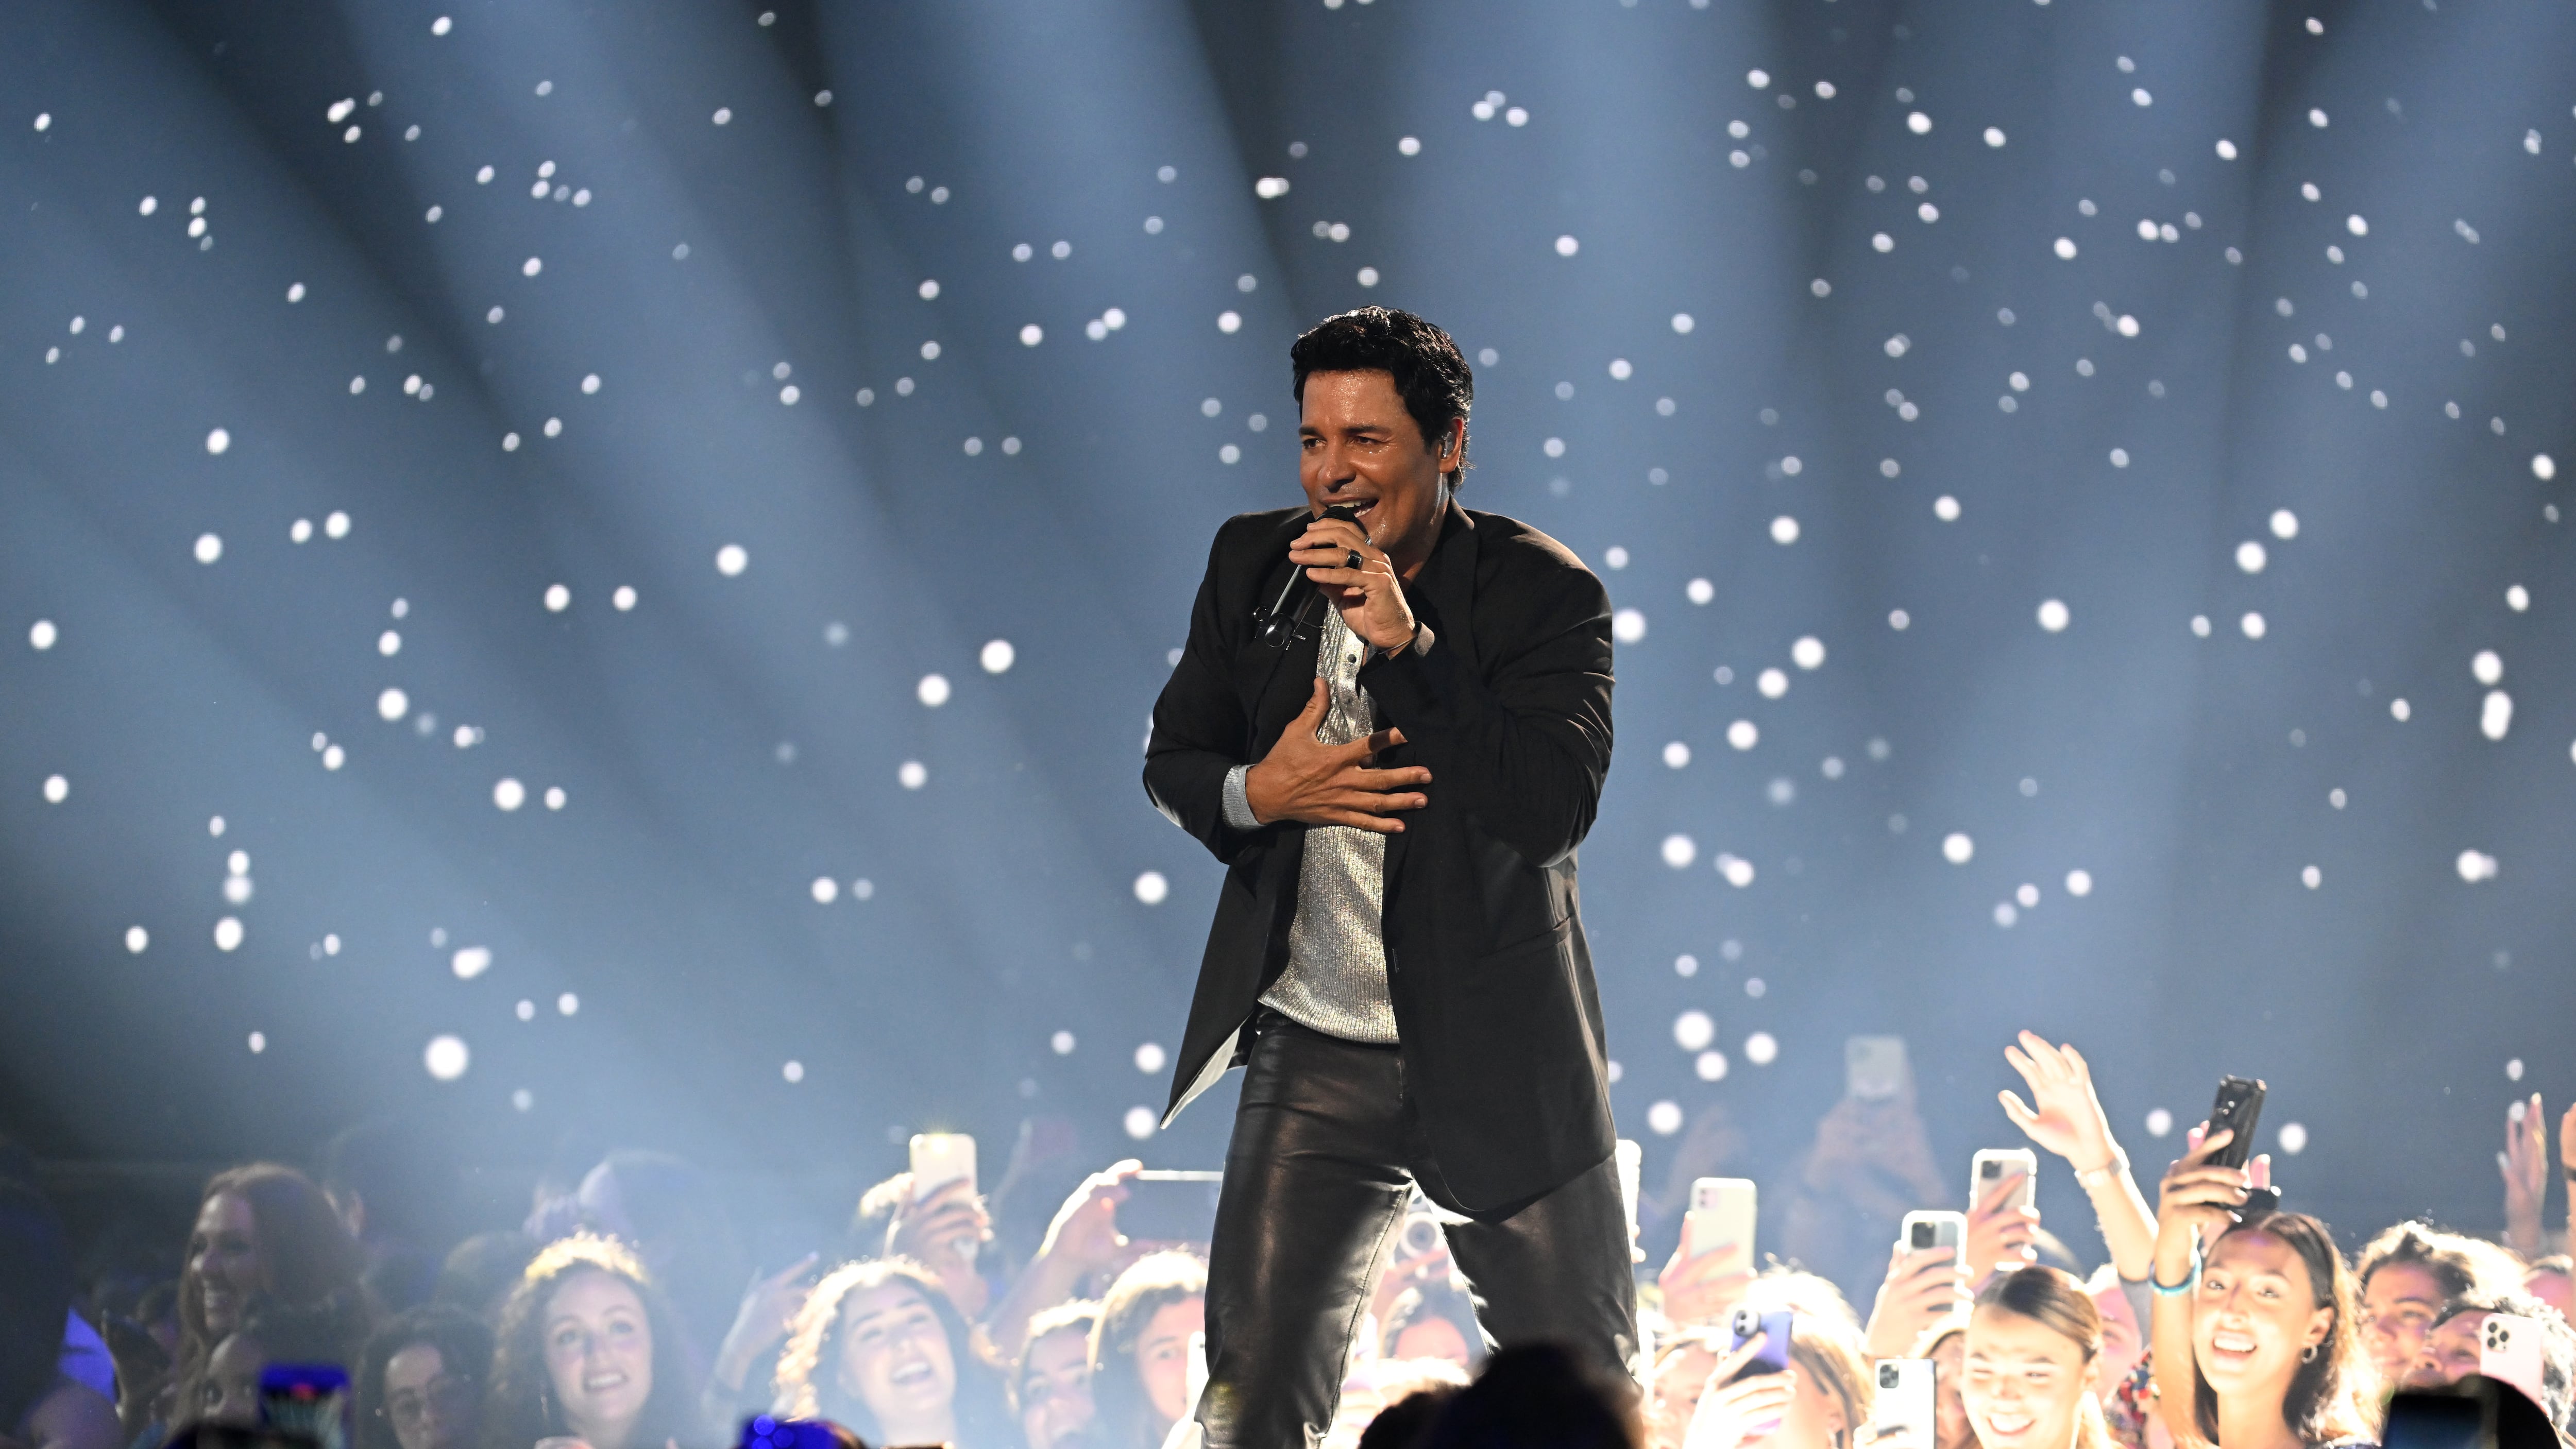 Chayanne / AFP